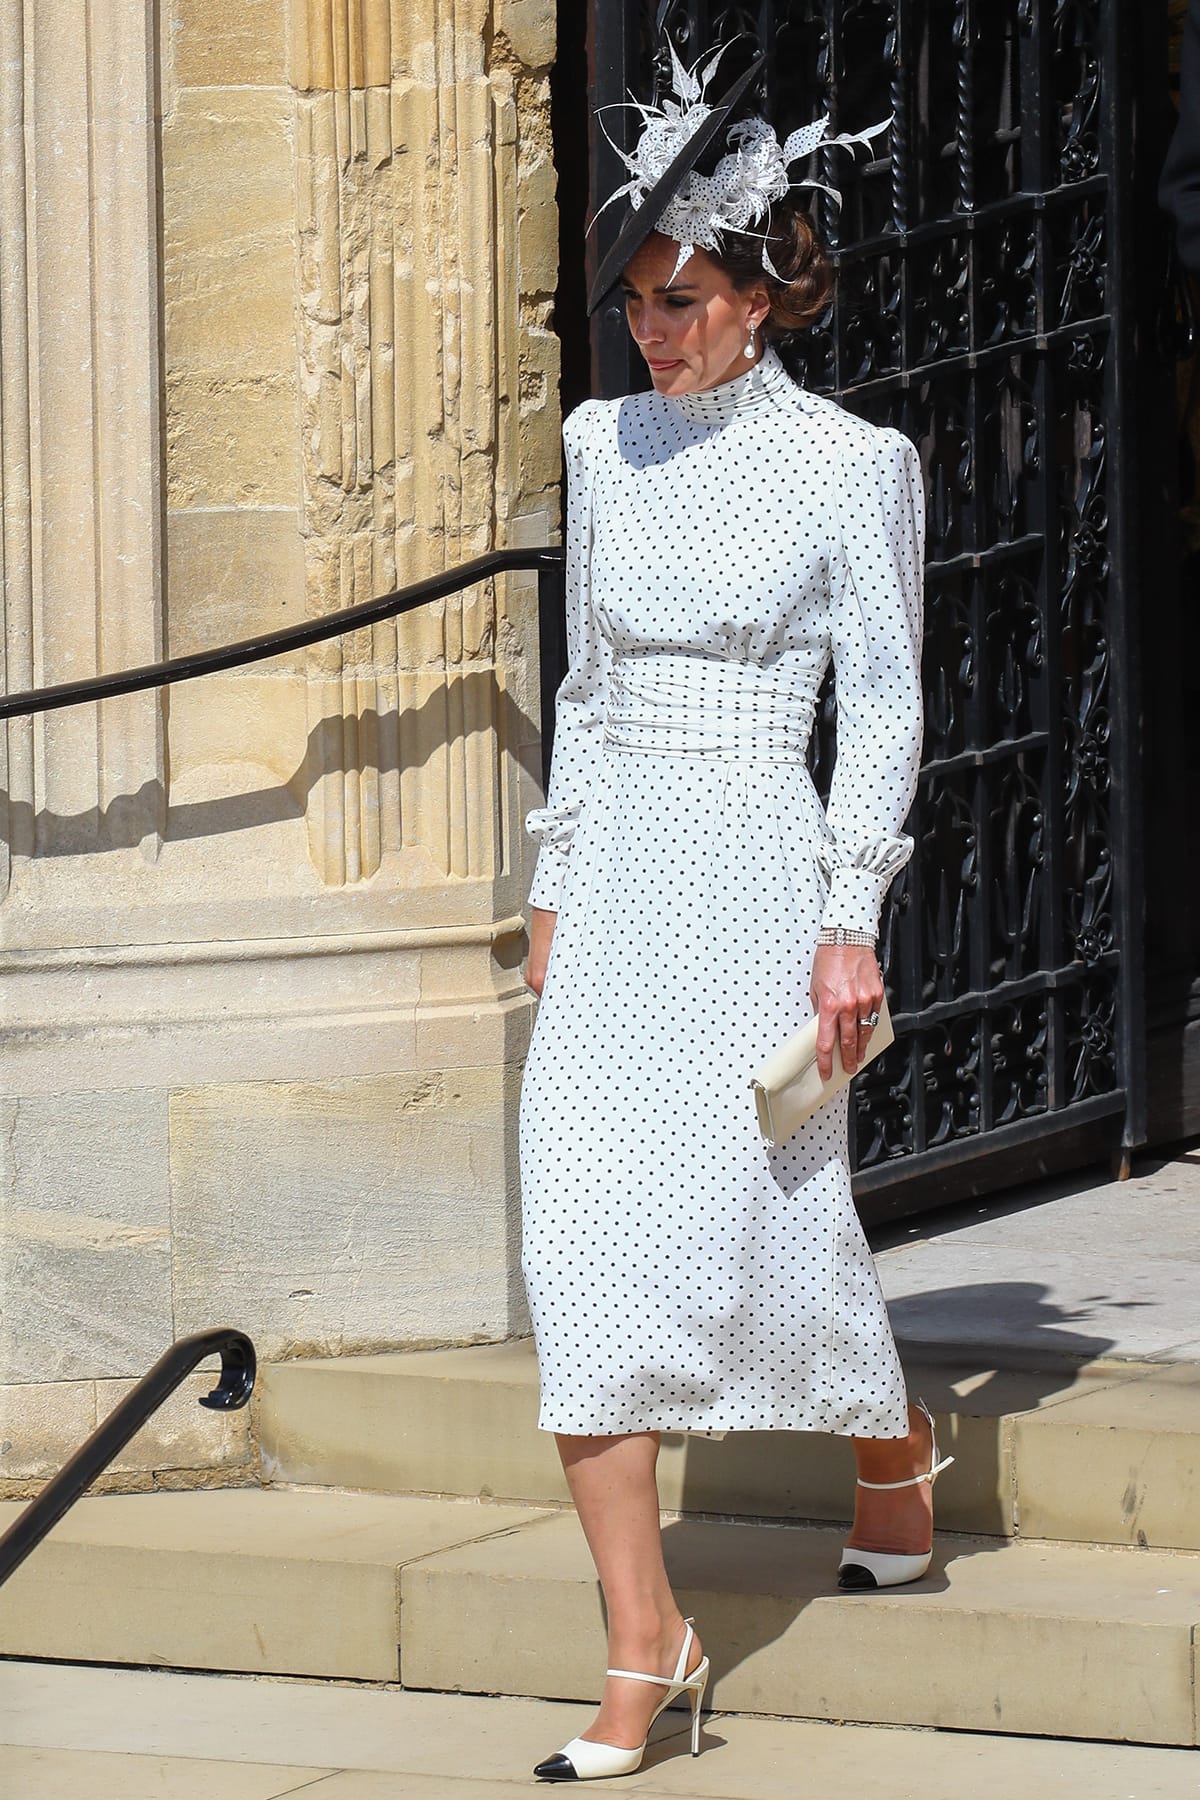 Kate Middleton channels Eliza Doolittle in a bespoke black-and-white polka dot midi dress by Alessandra Rich and two-tone Jennifer Chamandi pumps at the 2023 Order of the Garter Service on June 19, 2023